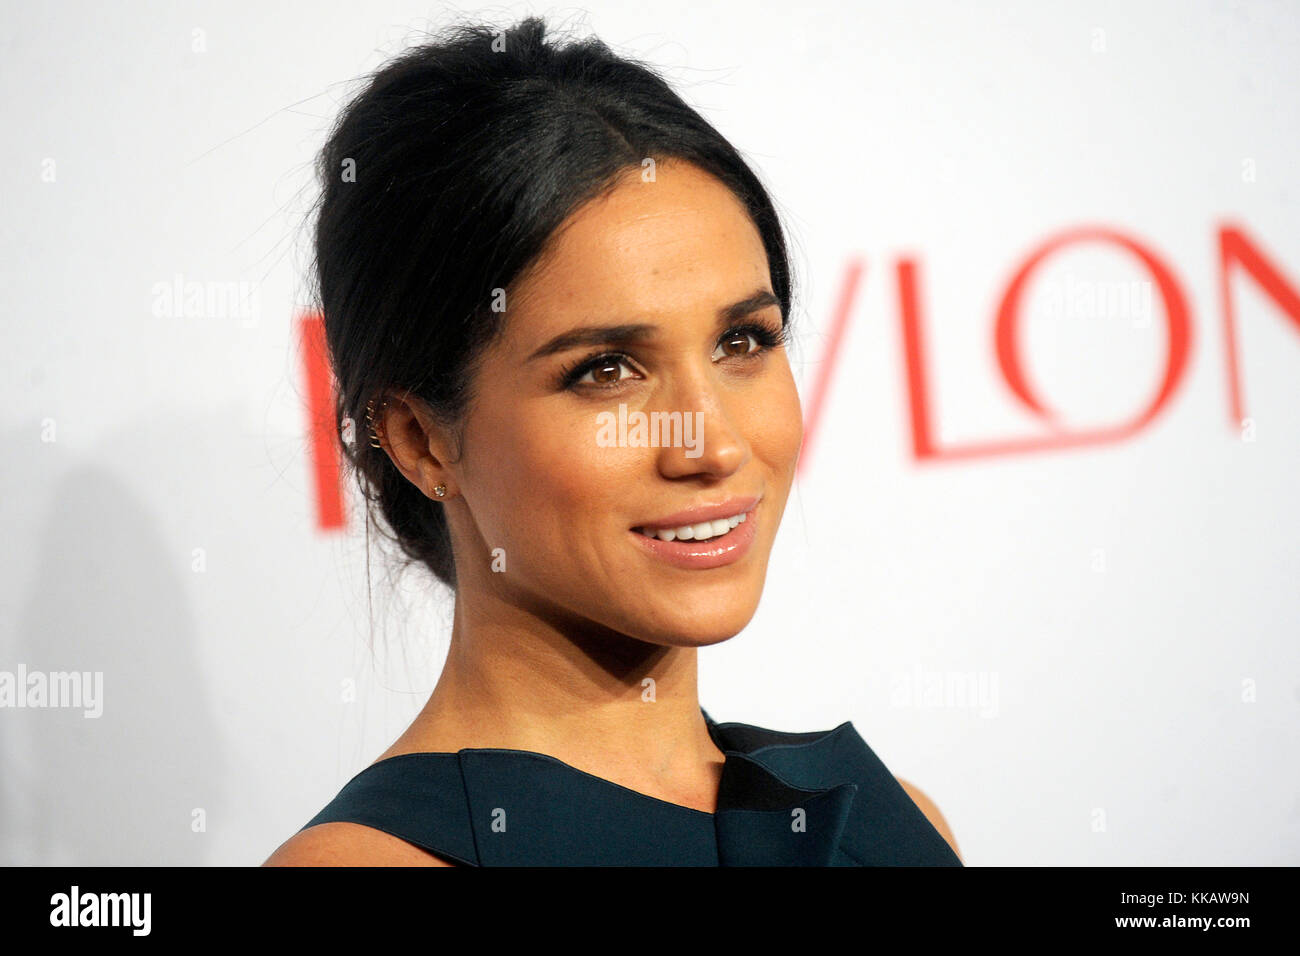 Meghan Markle attends the 'Elton John AIDS Foundation's 13th Annual An Enduring Vision Benefit' Gala at Cipriani Wall Street on October 28, 2014 in New York City. Stock Photo